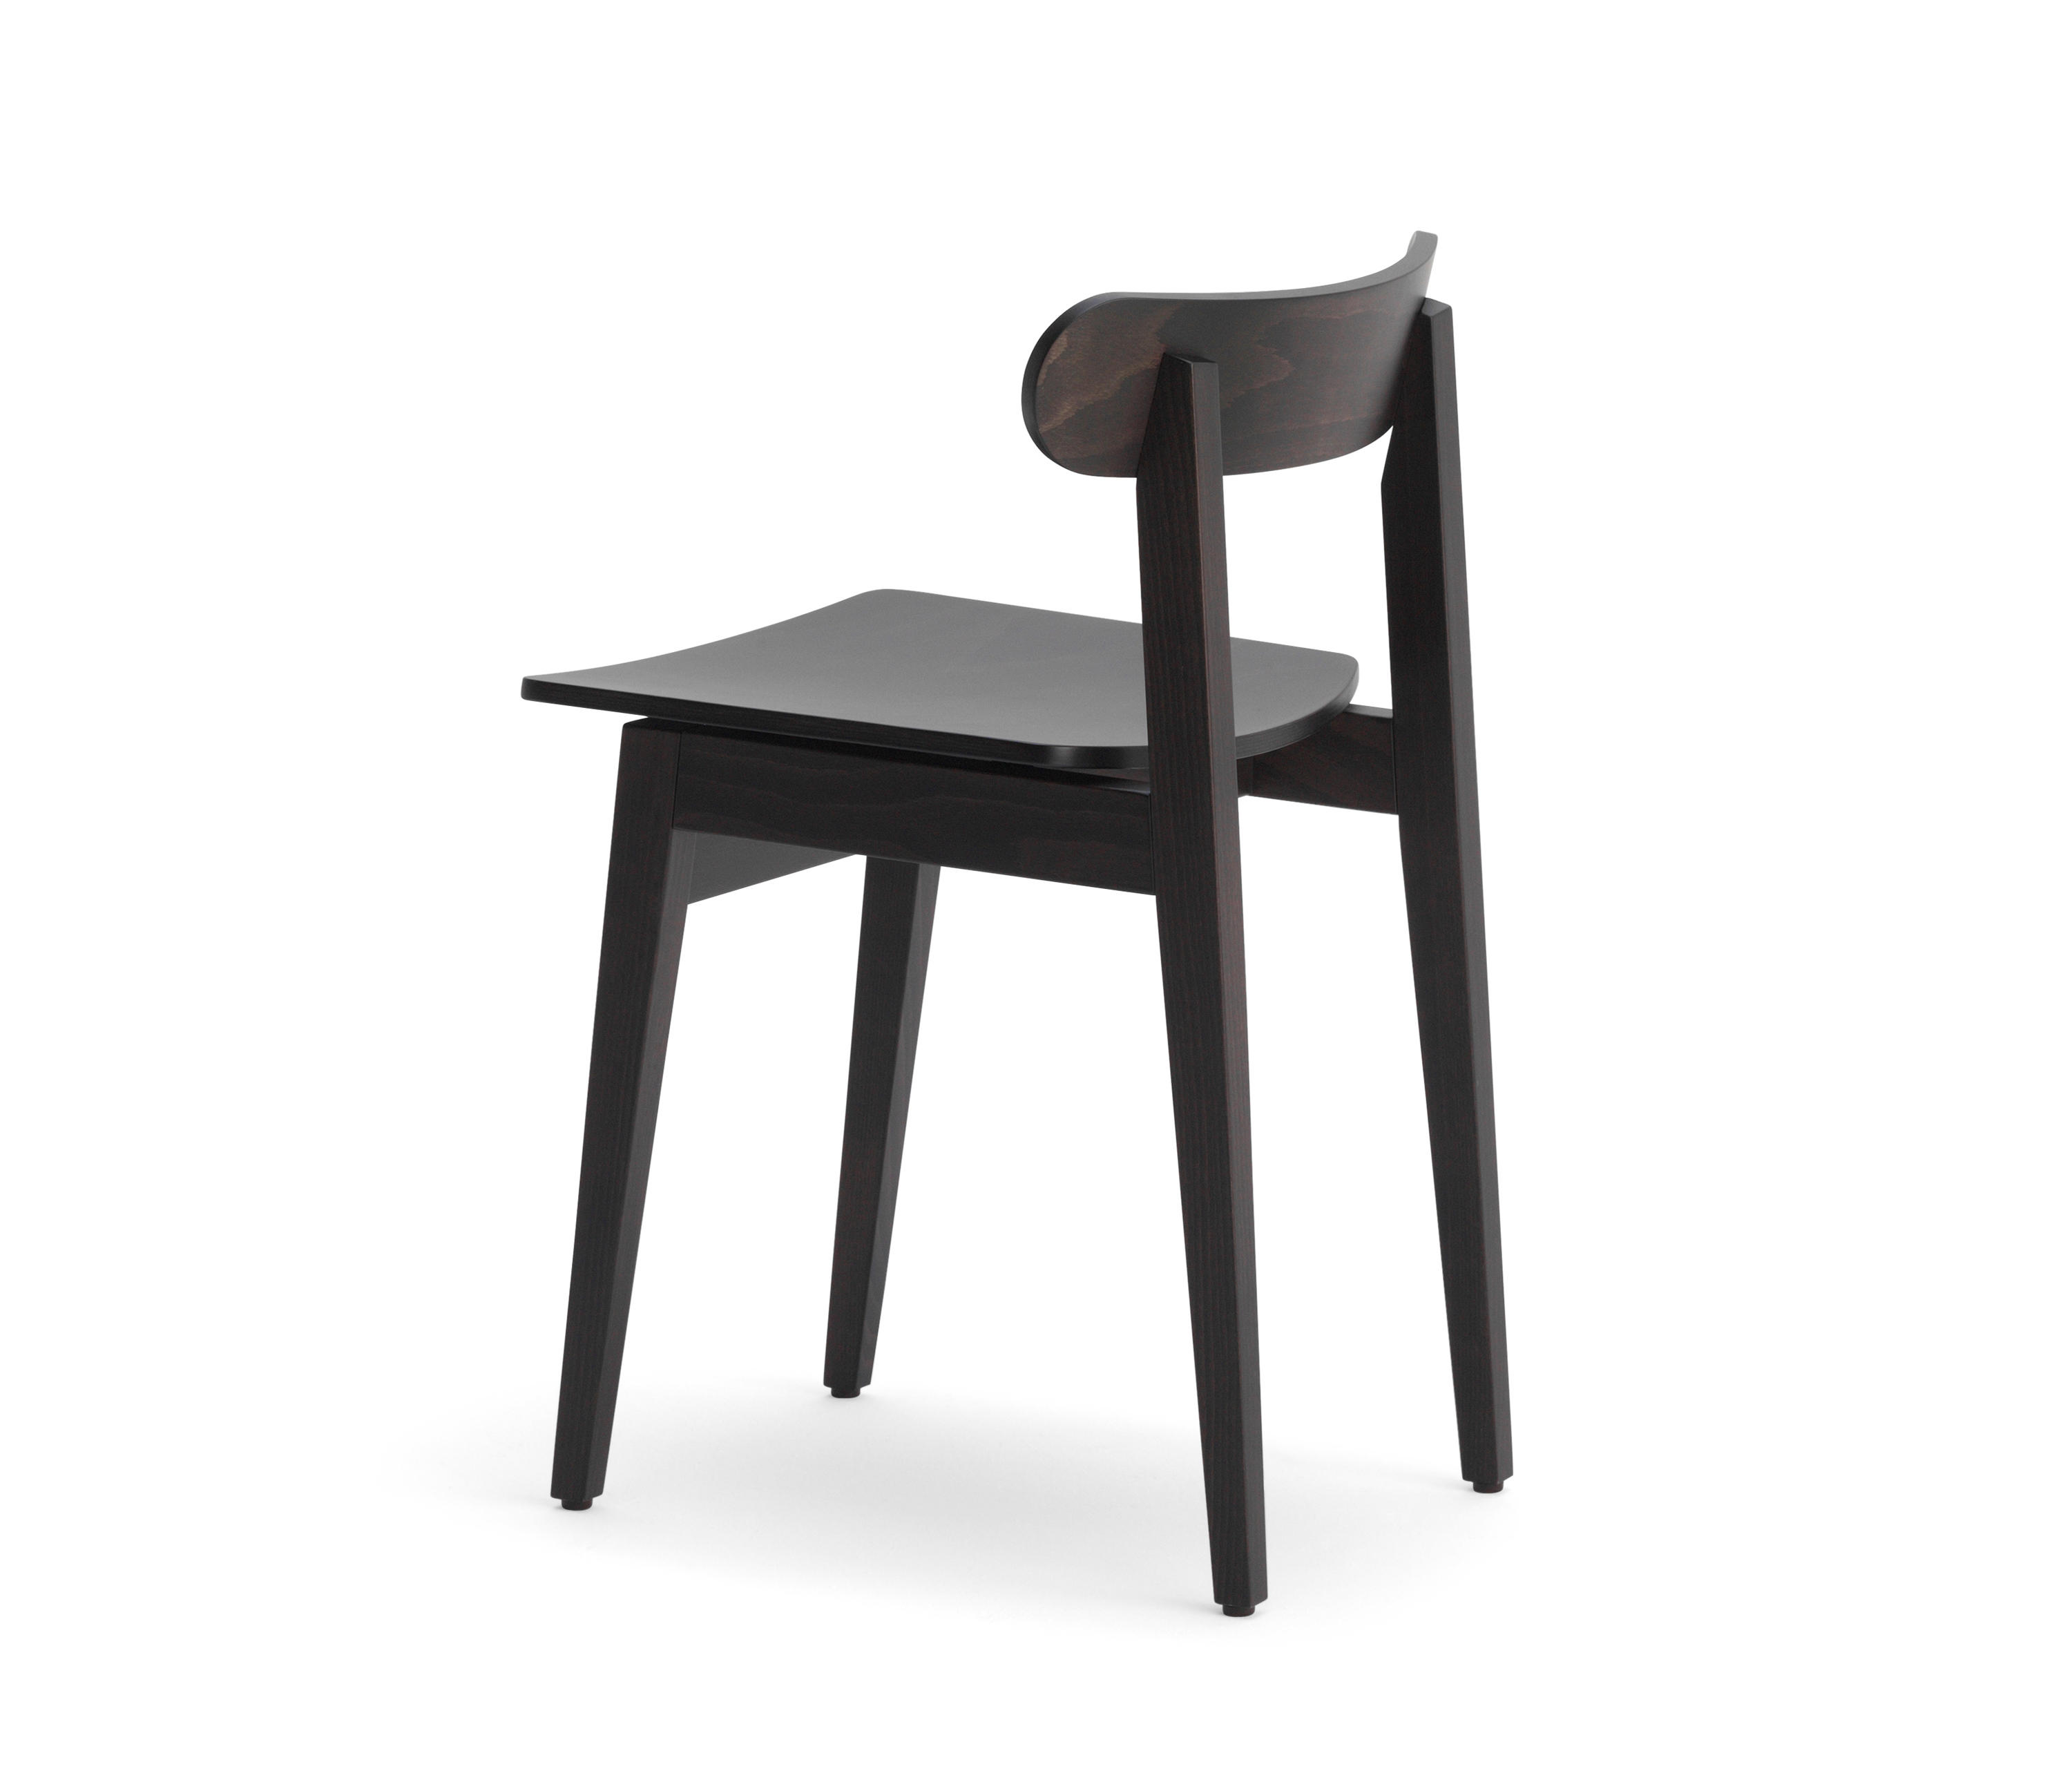 VIVALDI L - Chairs from Accento | Architonic